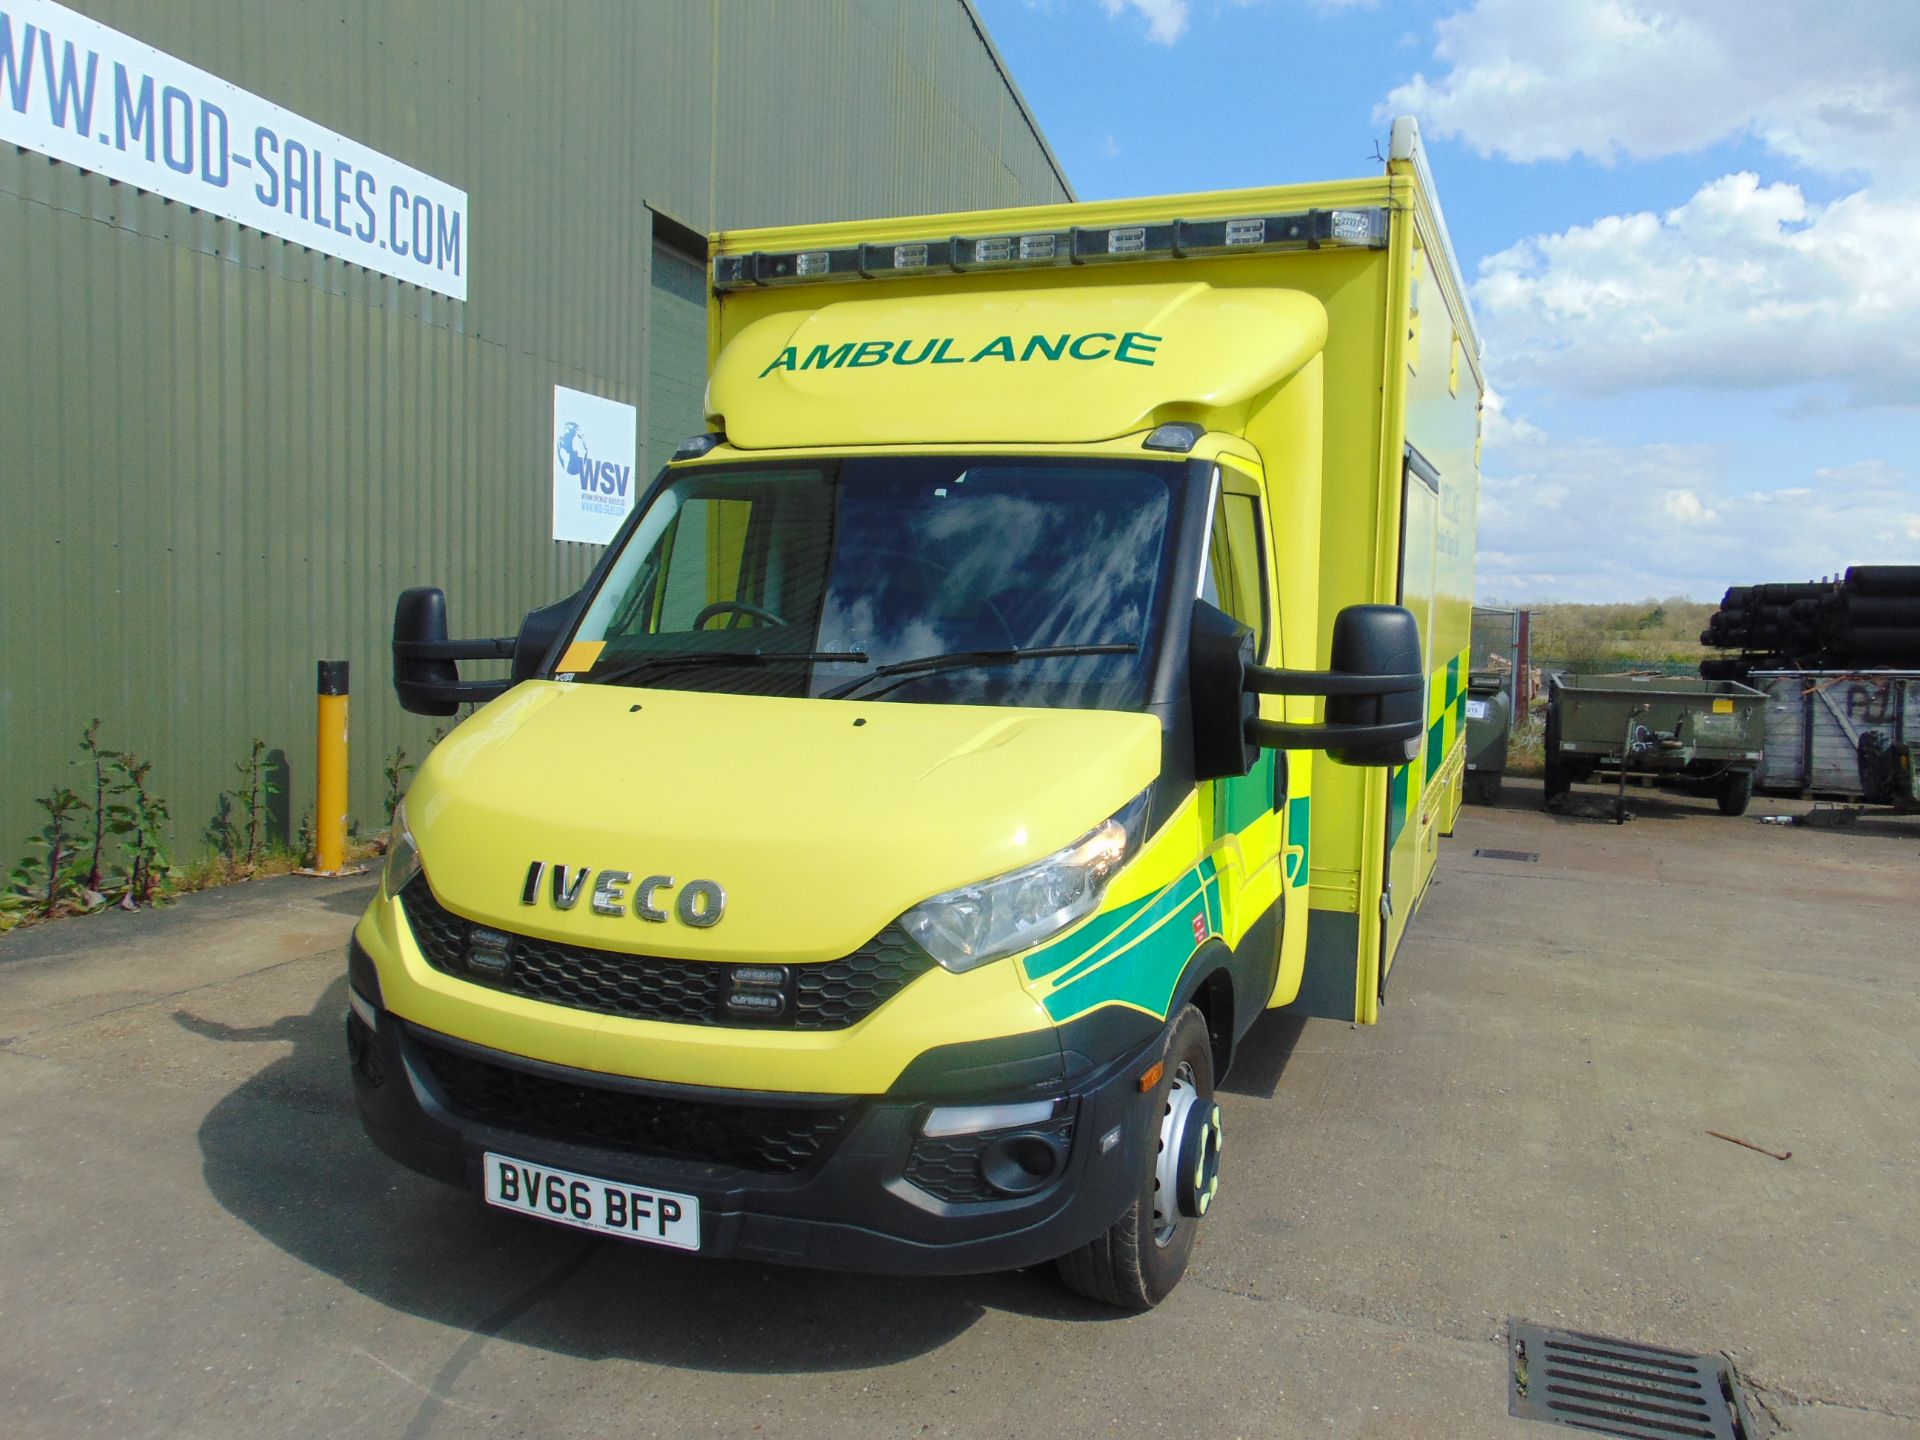 2016 Iveco Daily 70C21 4 x2 3.0Ltr Diesel - Incident Support Box Truck - Image 4 of 67